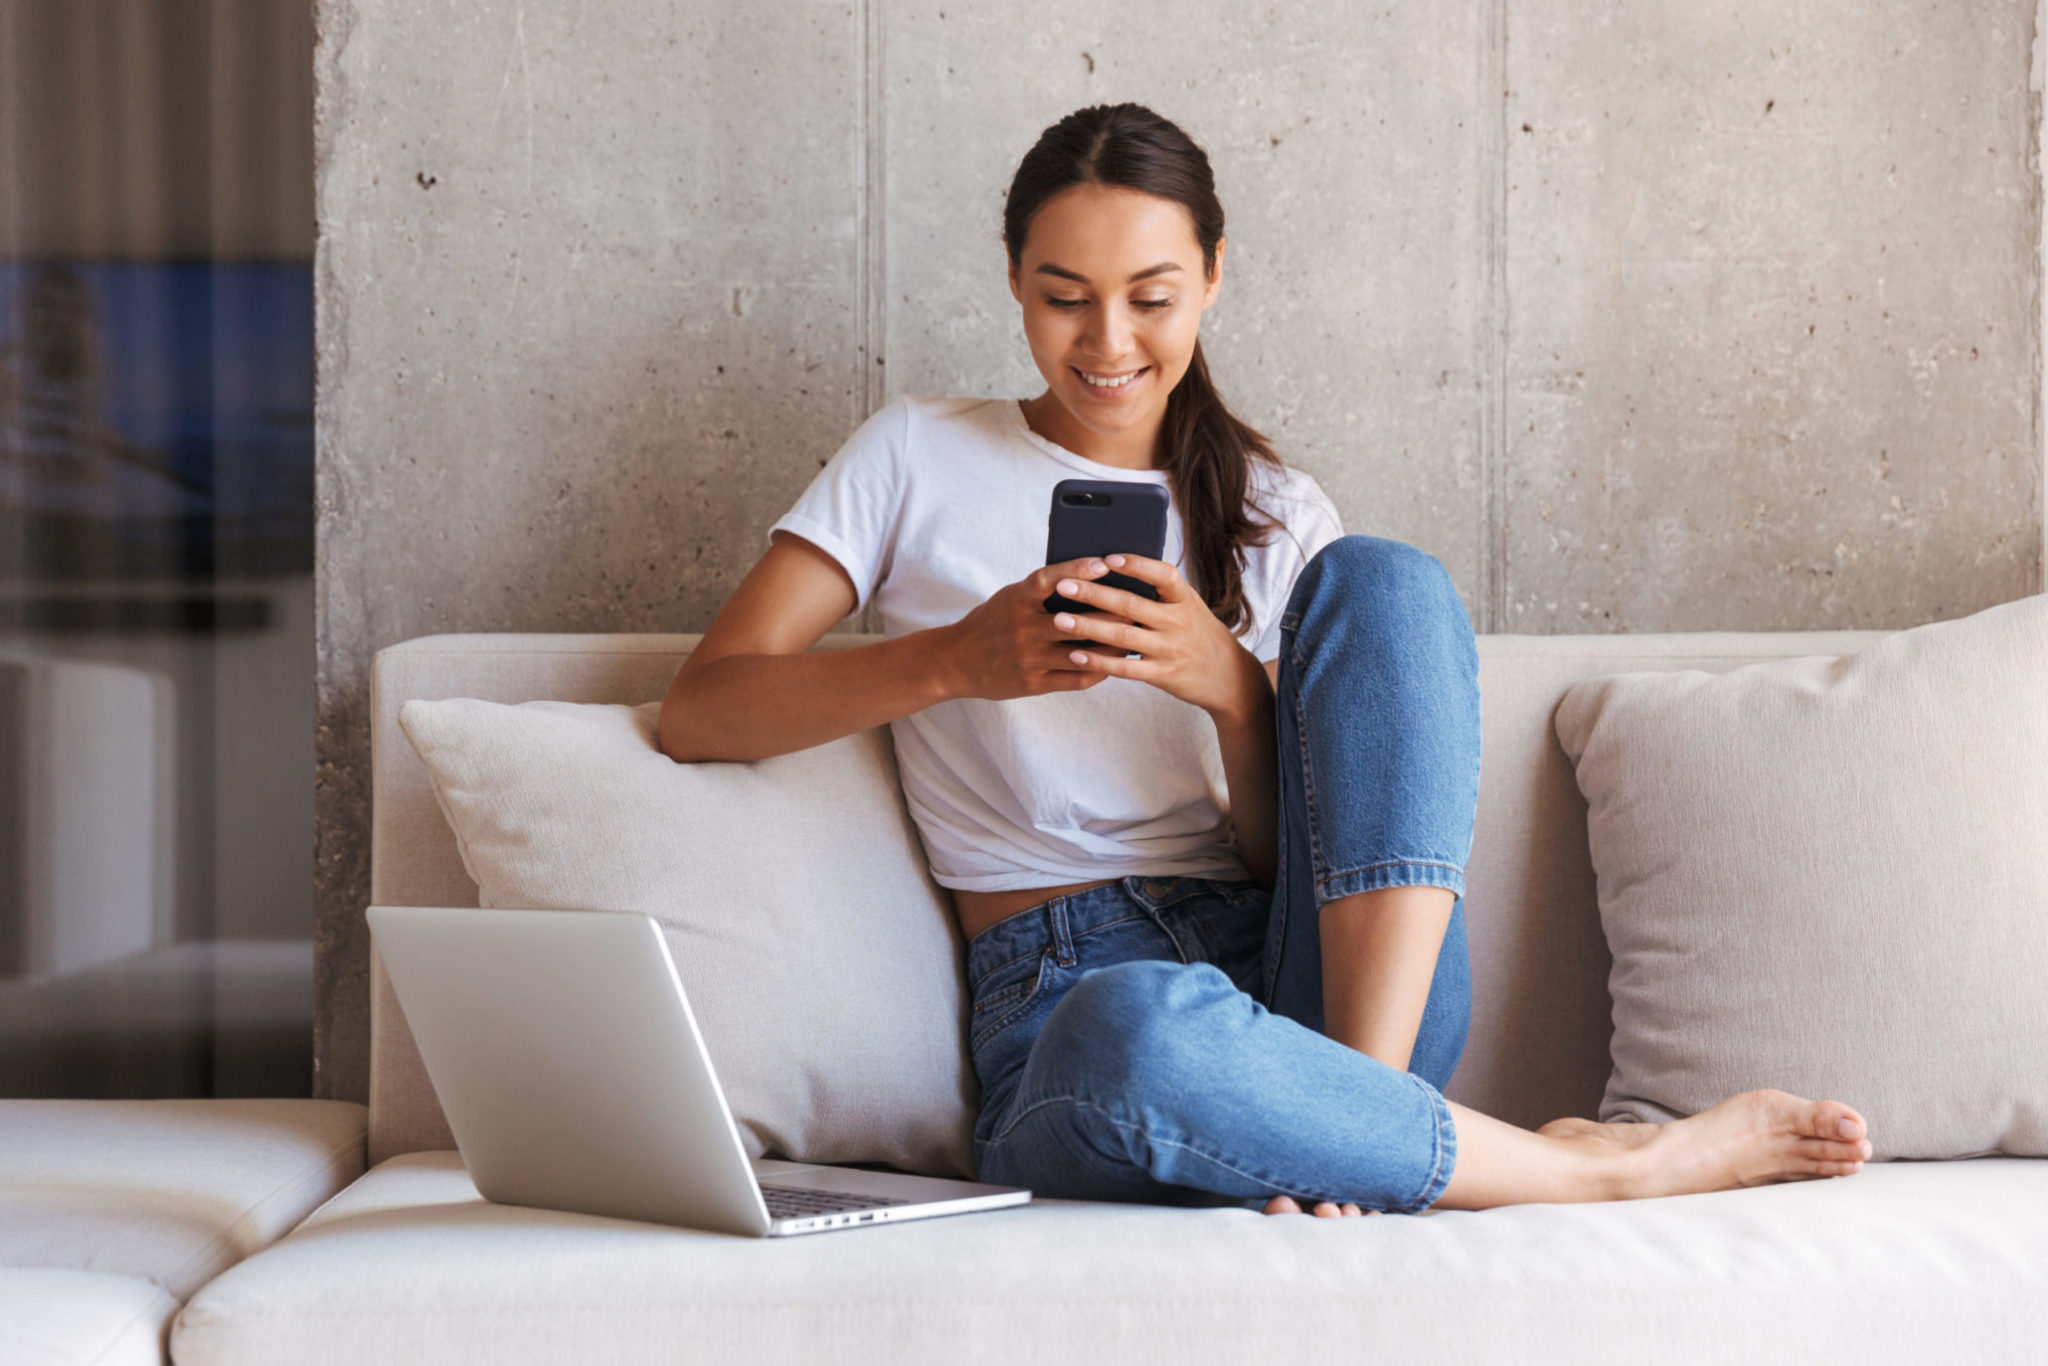 Young adult using mobile phone on a couch with laptop opened beside them